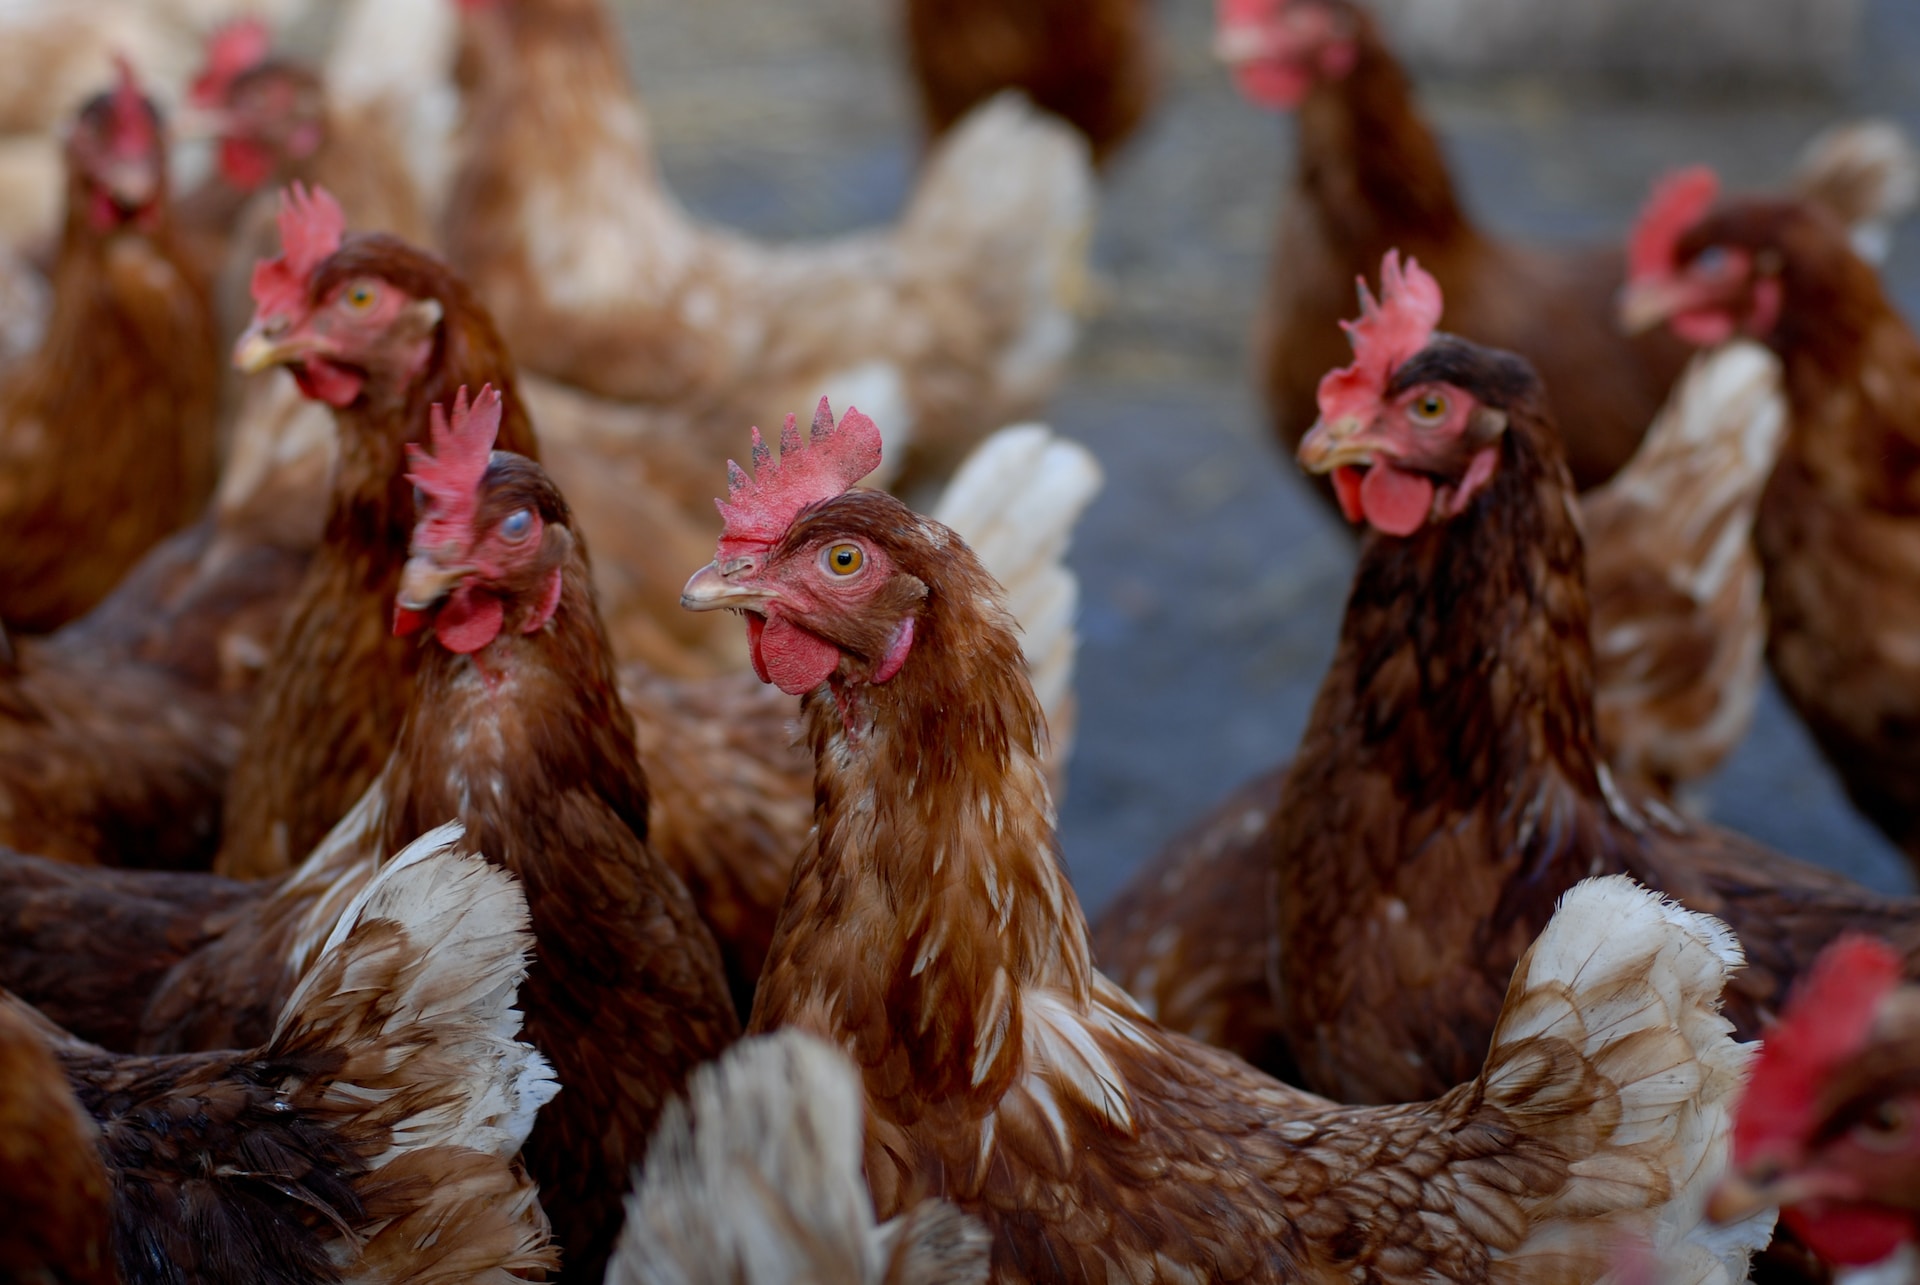 Photo of a group of more than 10 chickens, three of which are in focus.